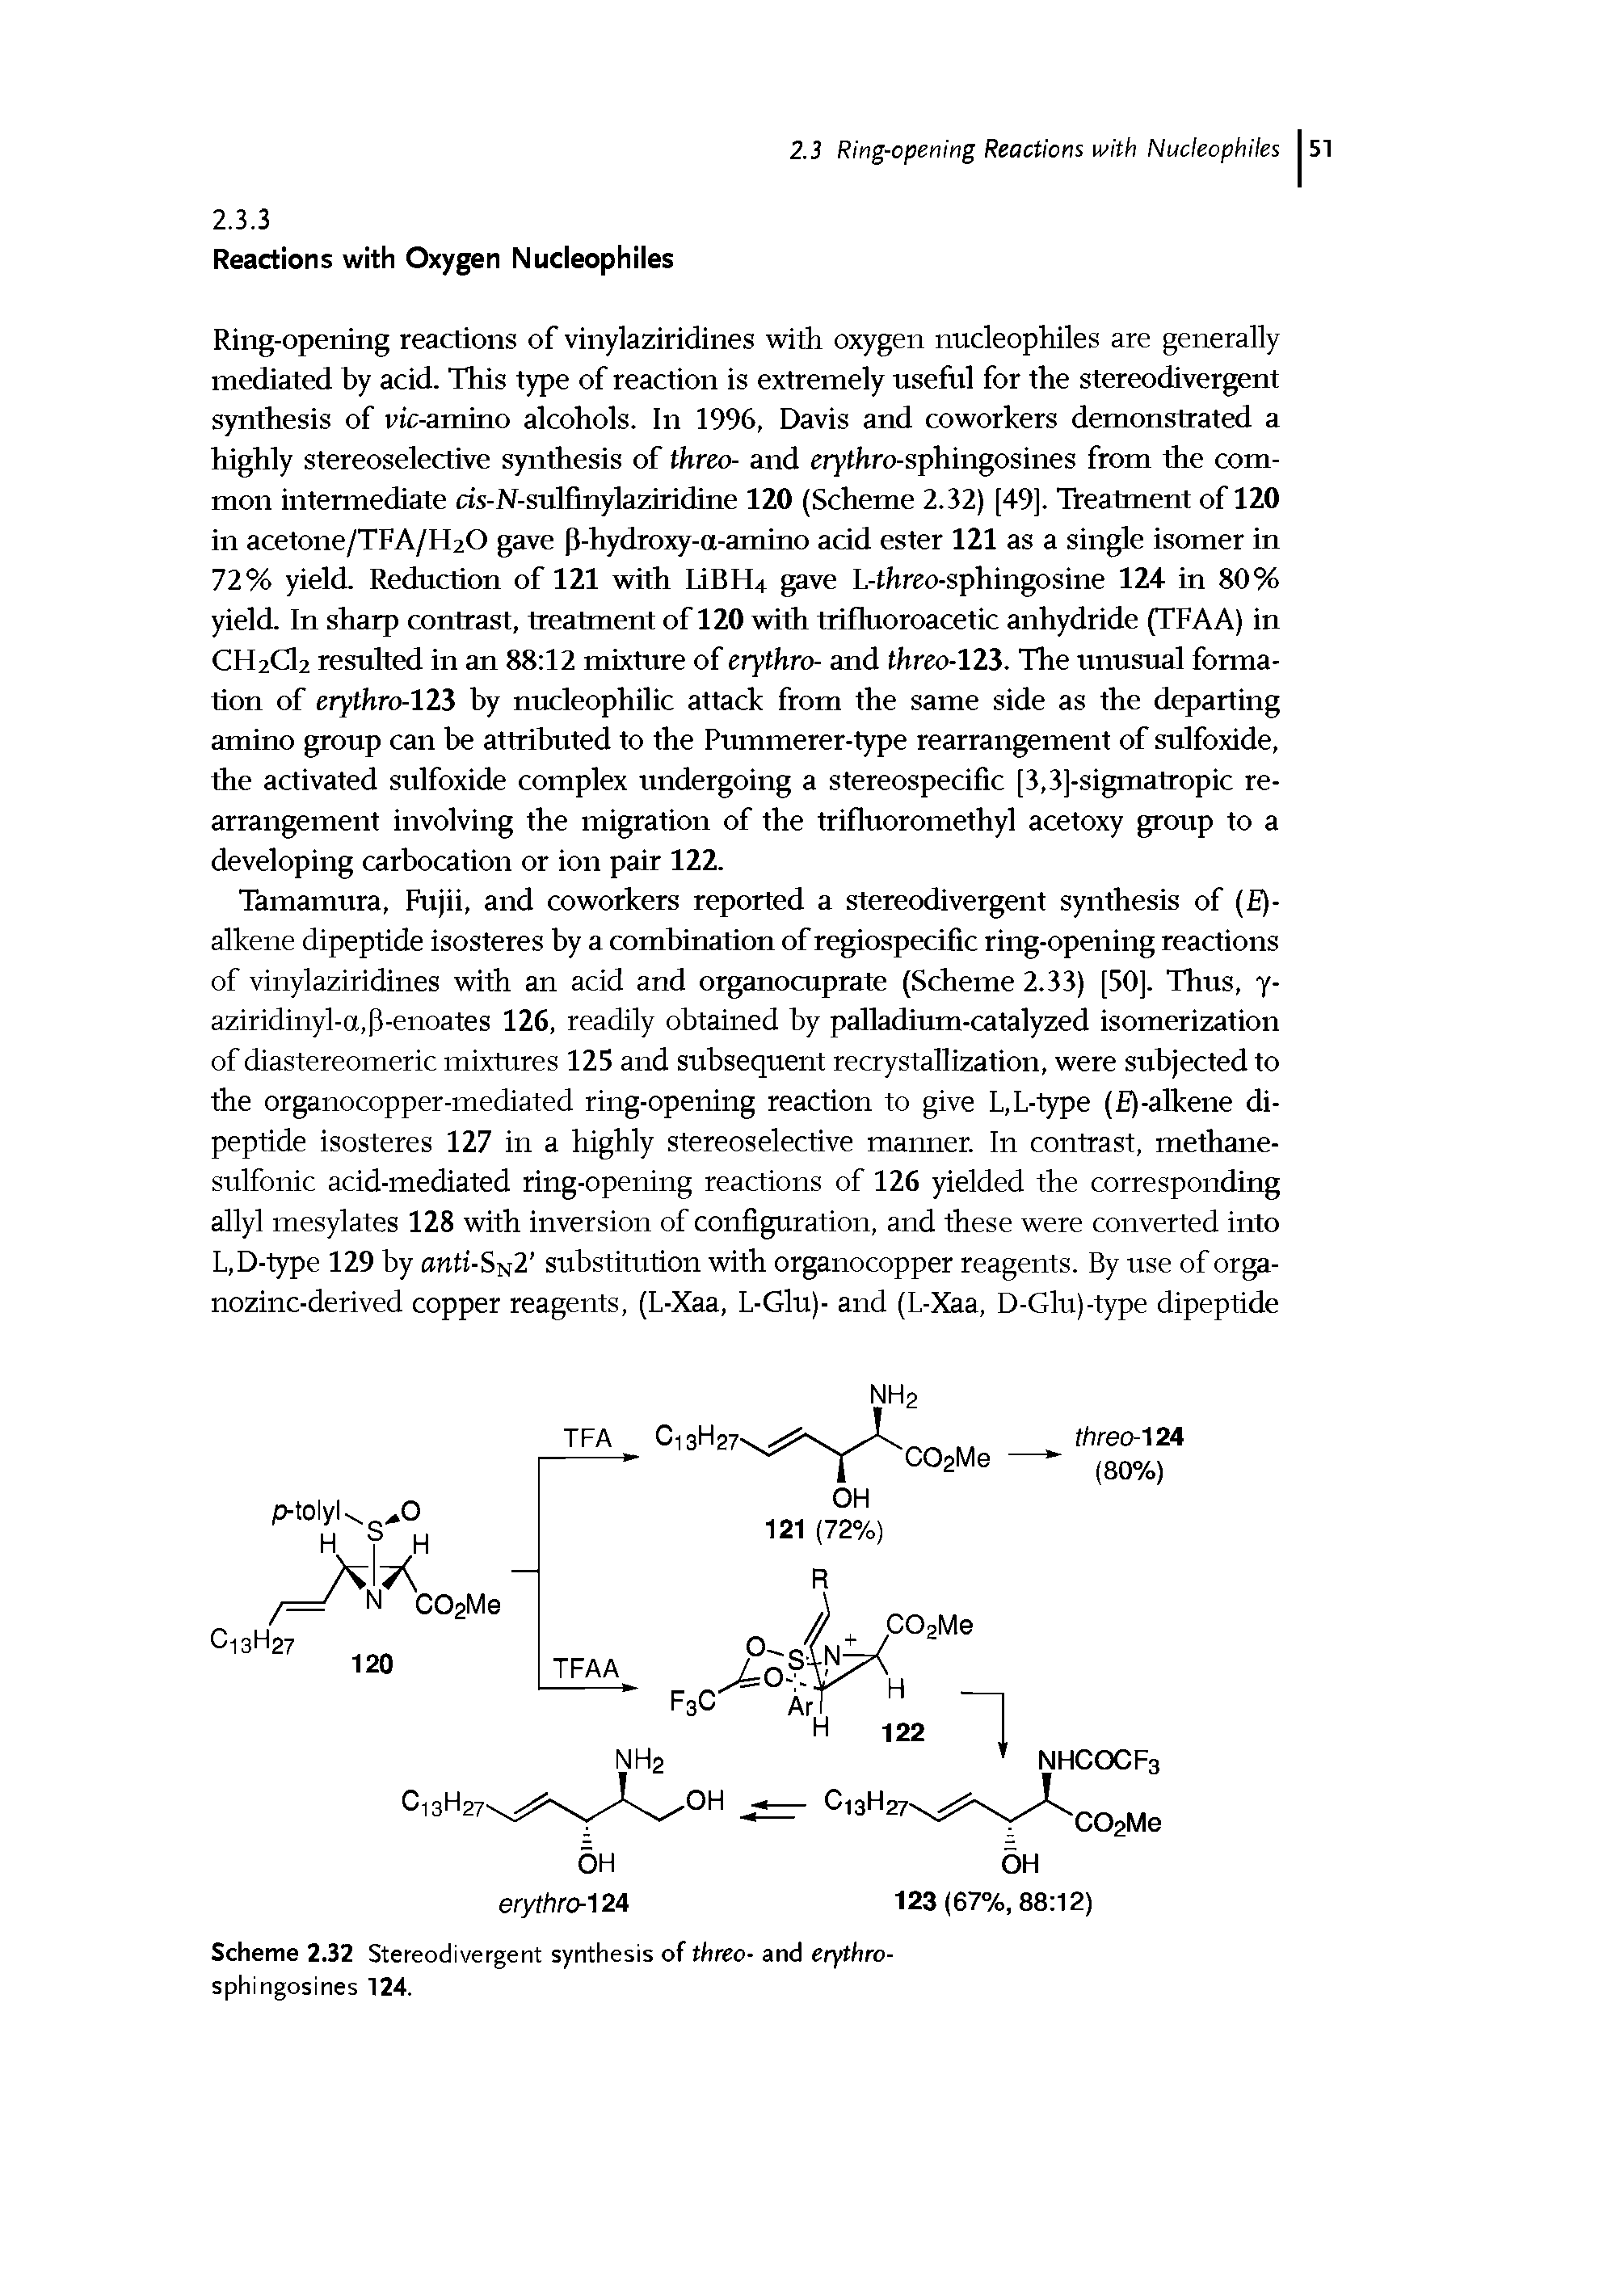 Scheme 2.32 Stereodivergent synthesis of threo- and erythro-sphingosines 124.